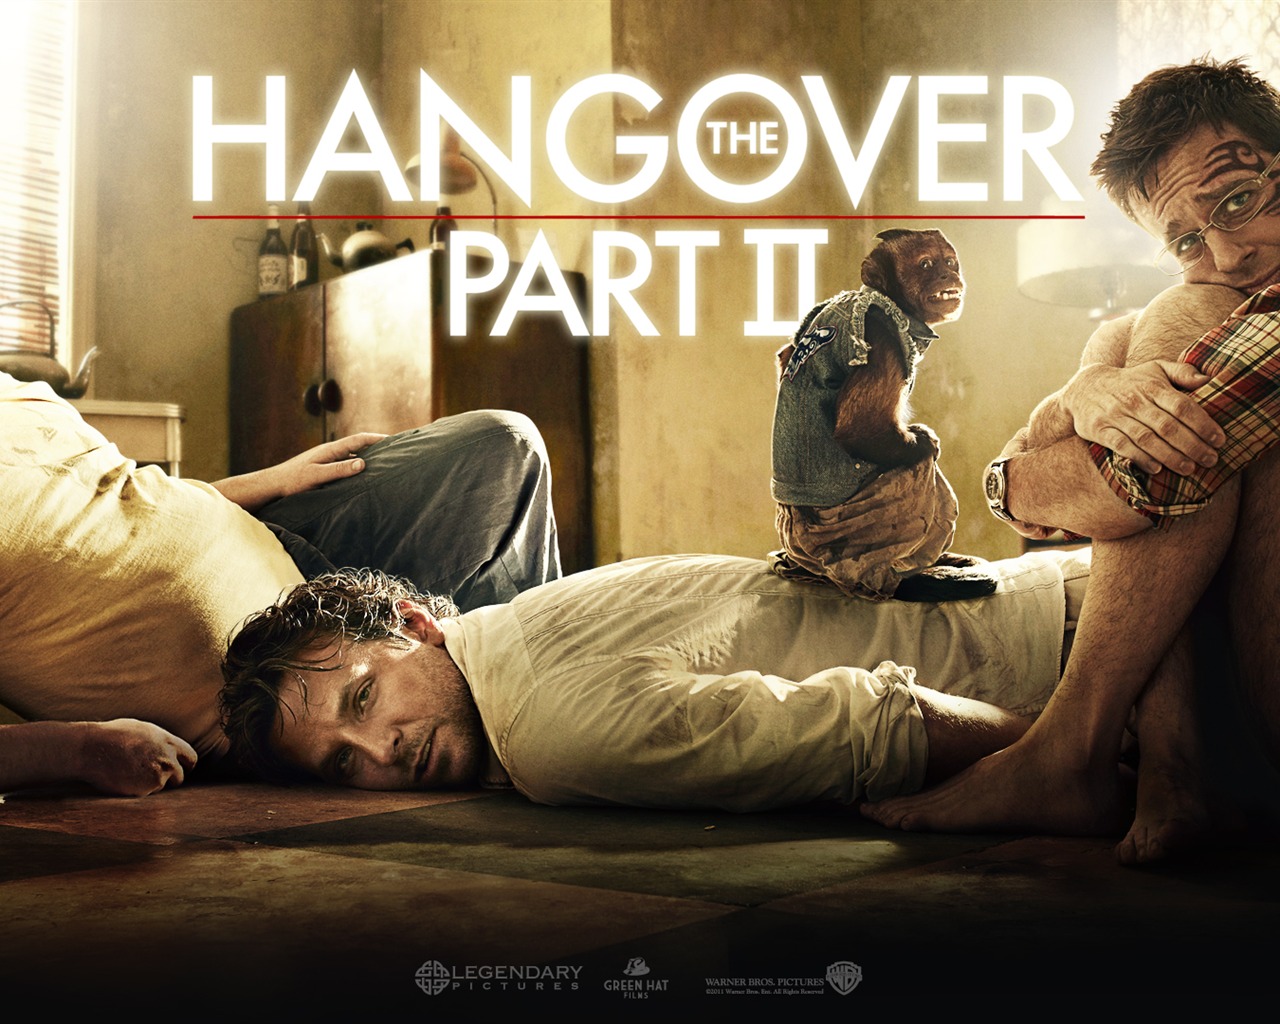 The Hangover část II tapety #9 - 1280x1024